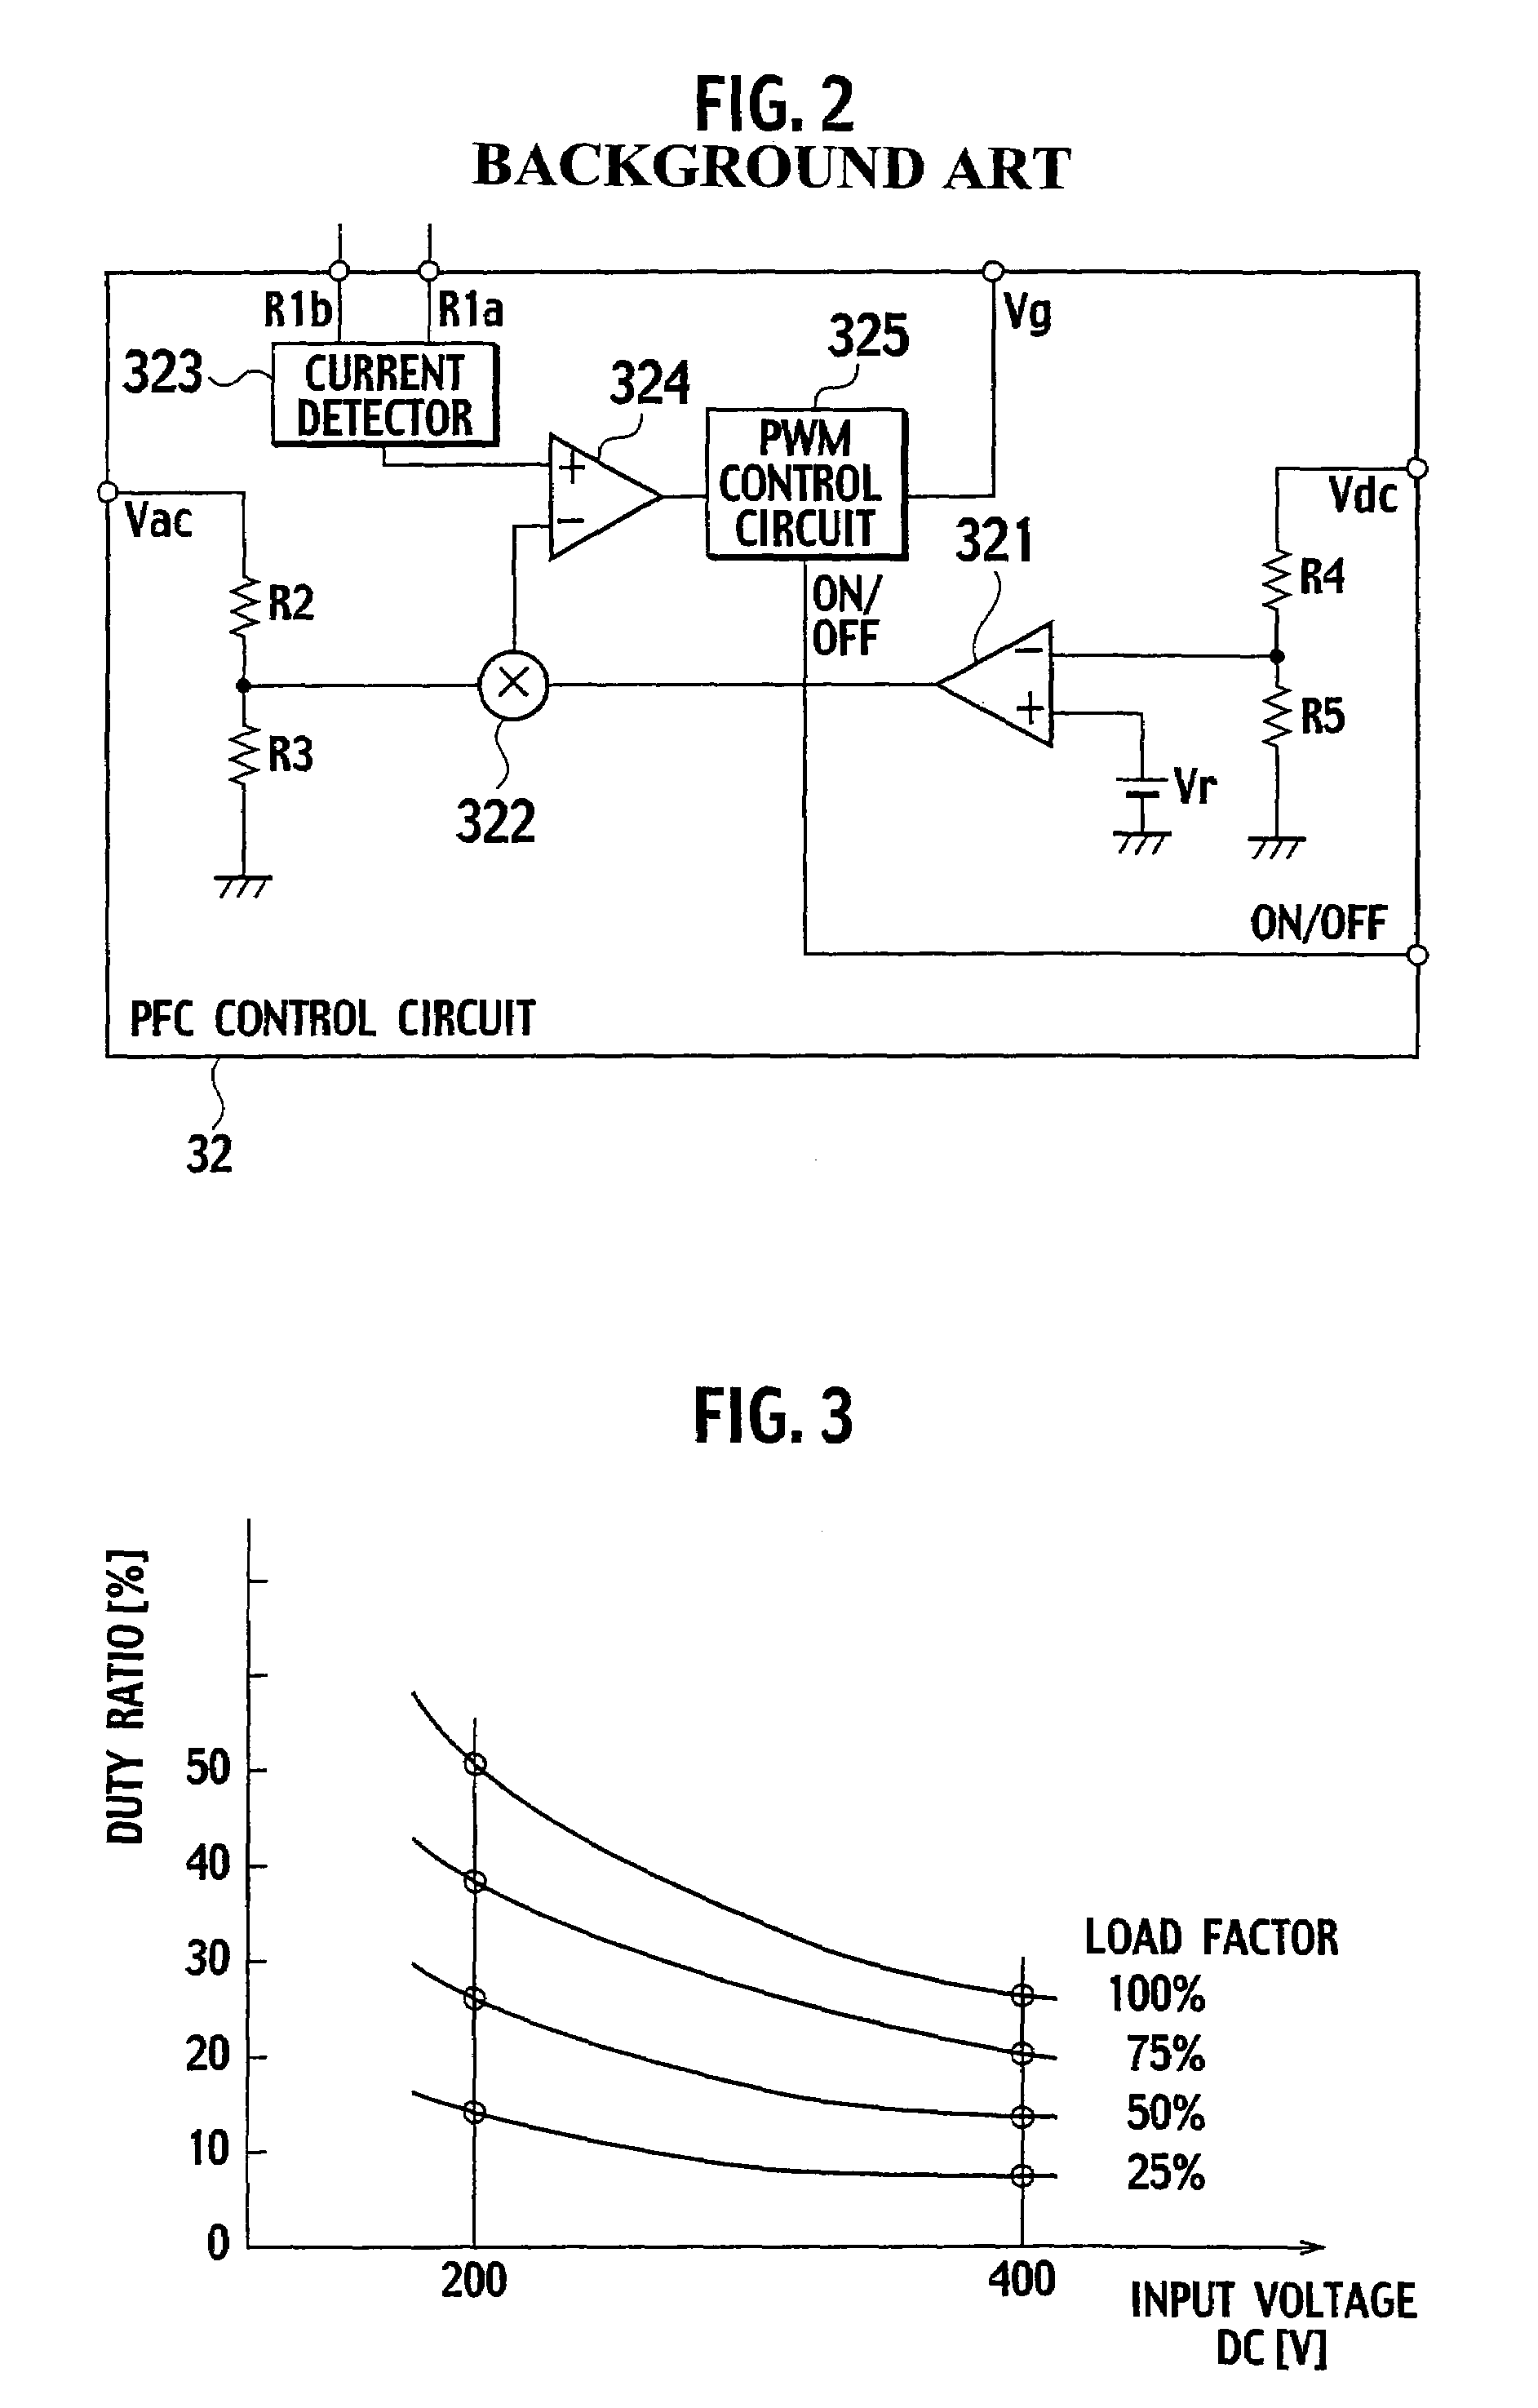 Switching power supply device